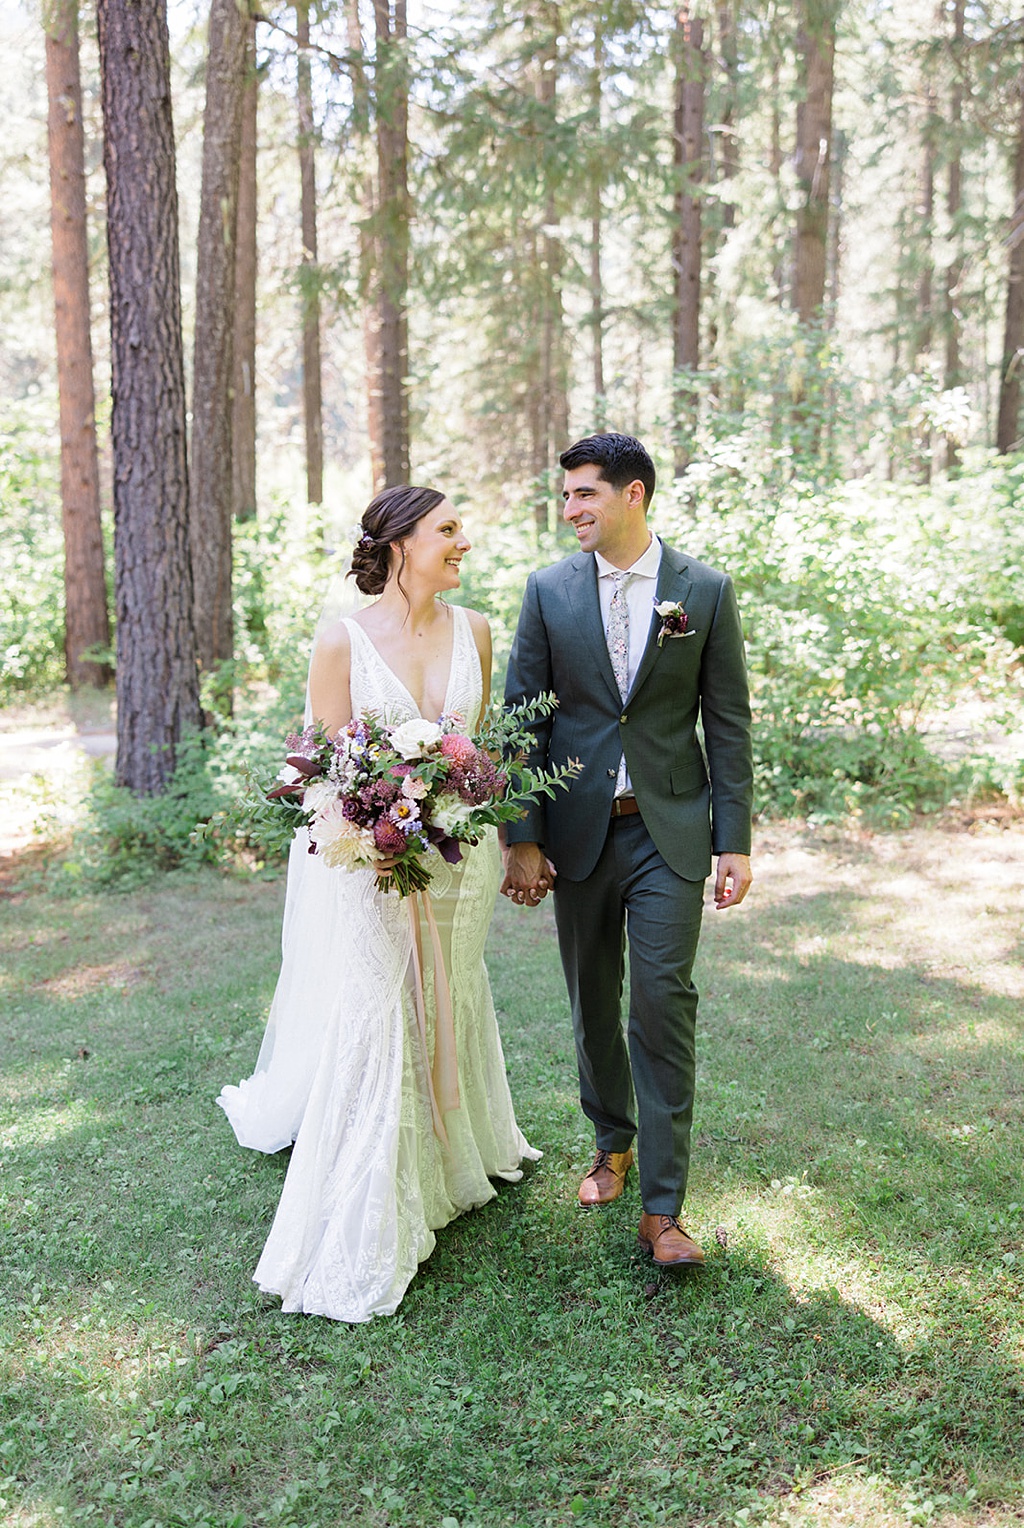 The bride and groom walk through the woods at this Tierra Retreat Center wedding